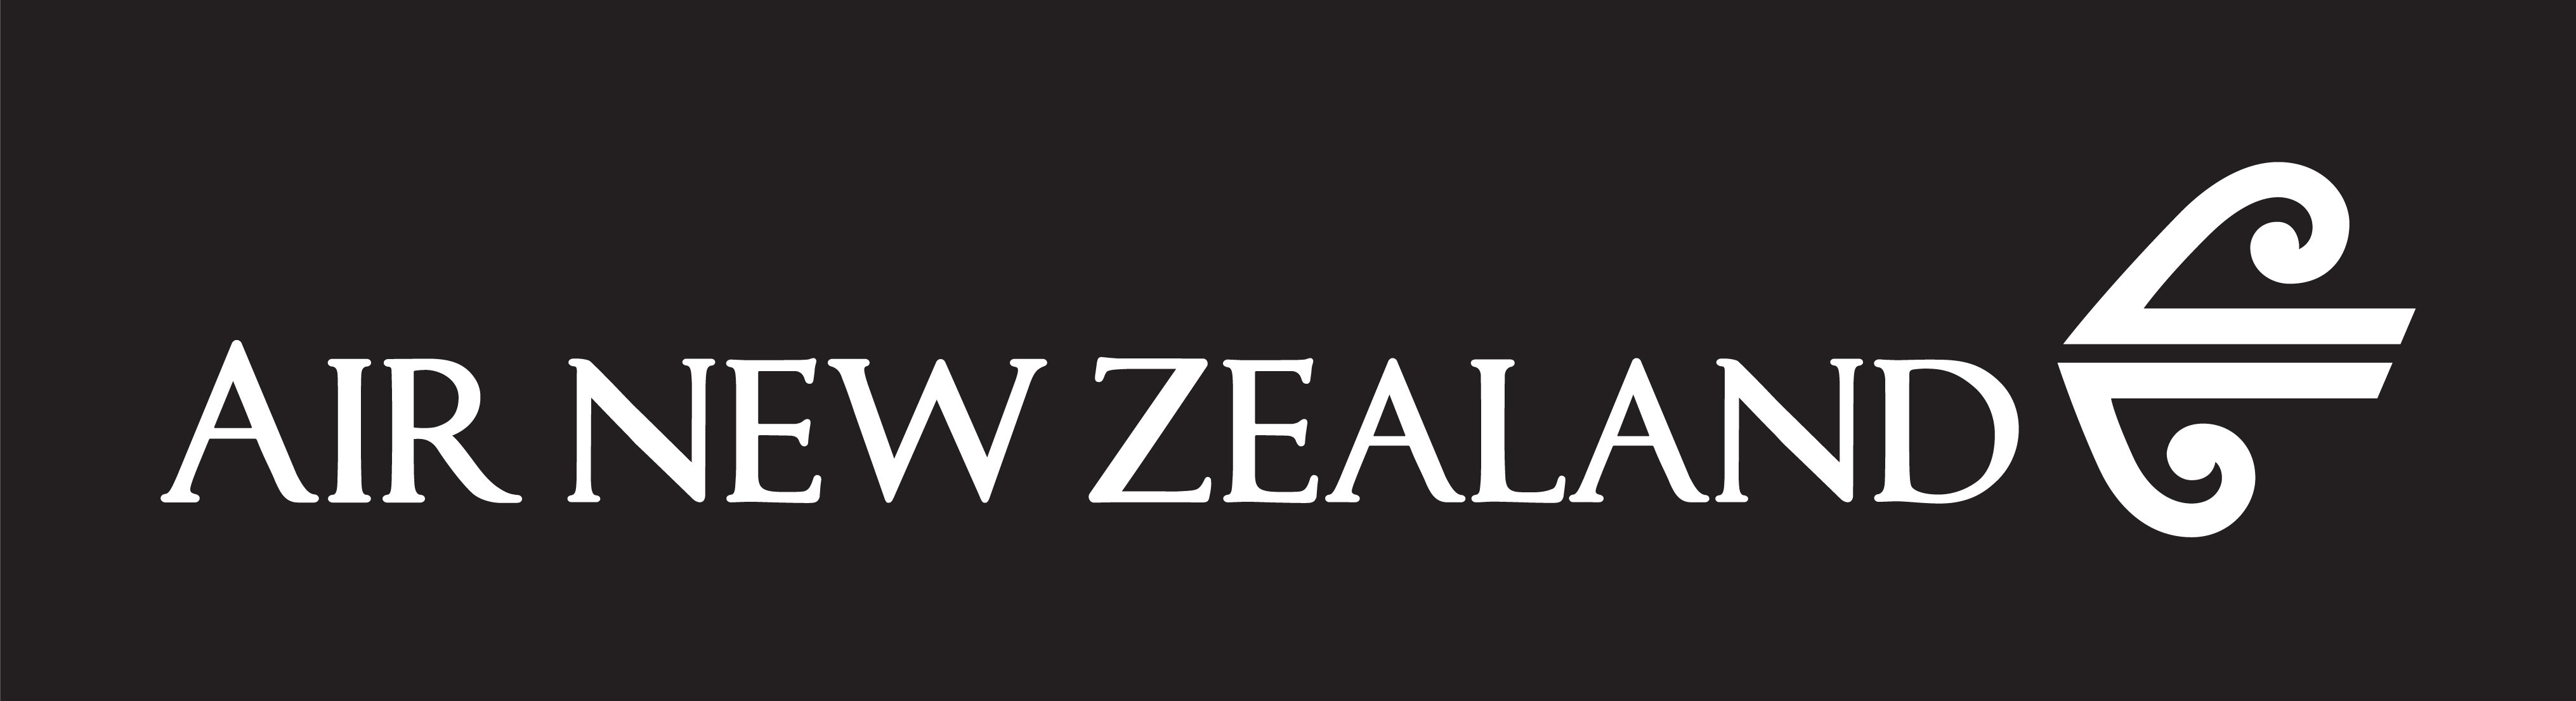 Air New Zealand   Air New Zealand Png - Air New Zealand Vector, Transparent background PNG HD thumbnail